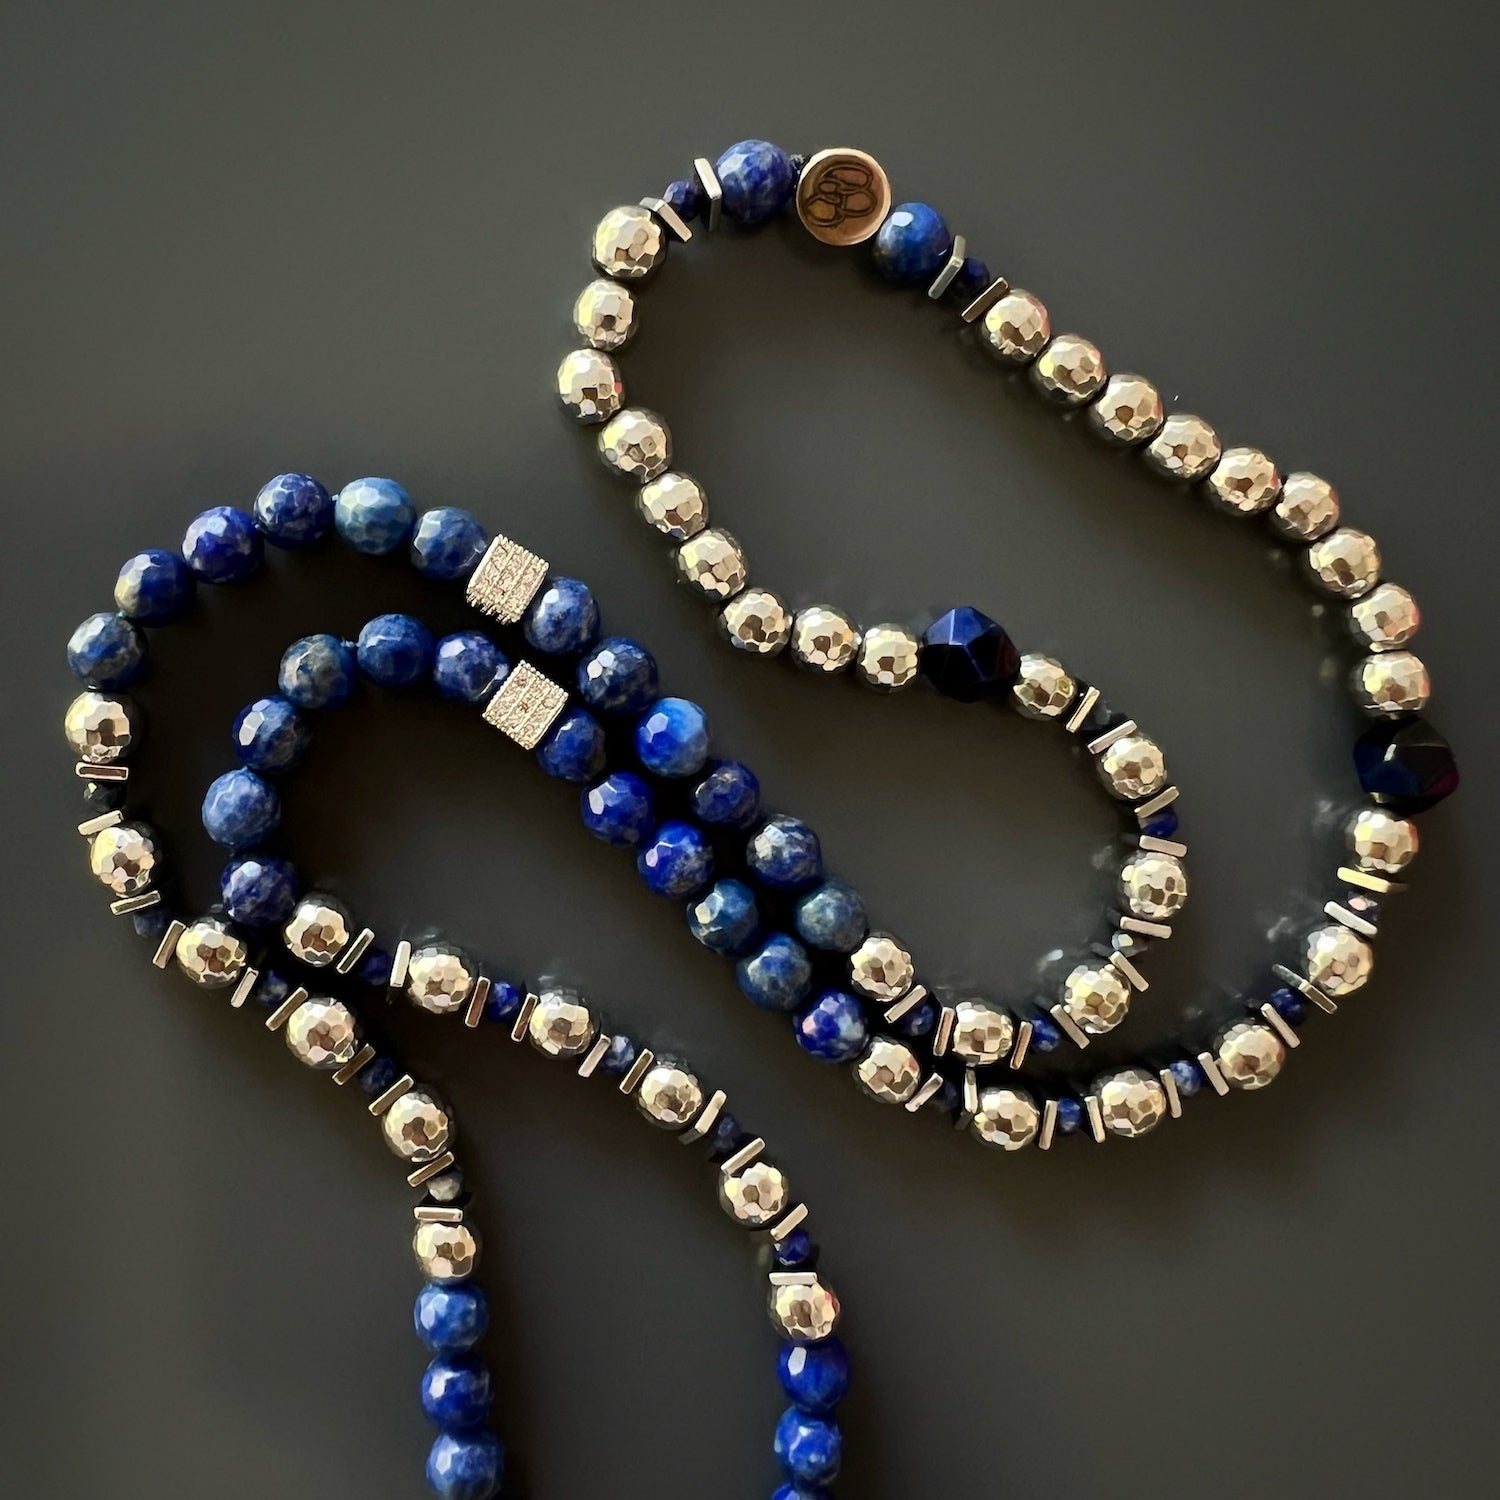 Vibrant Blue Lapis Lazuli Necklace - Find balance and protection with this stunning accessory.